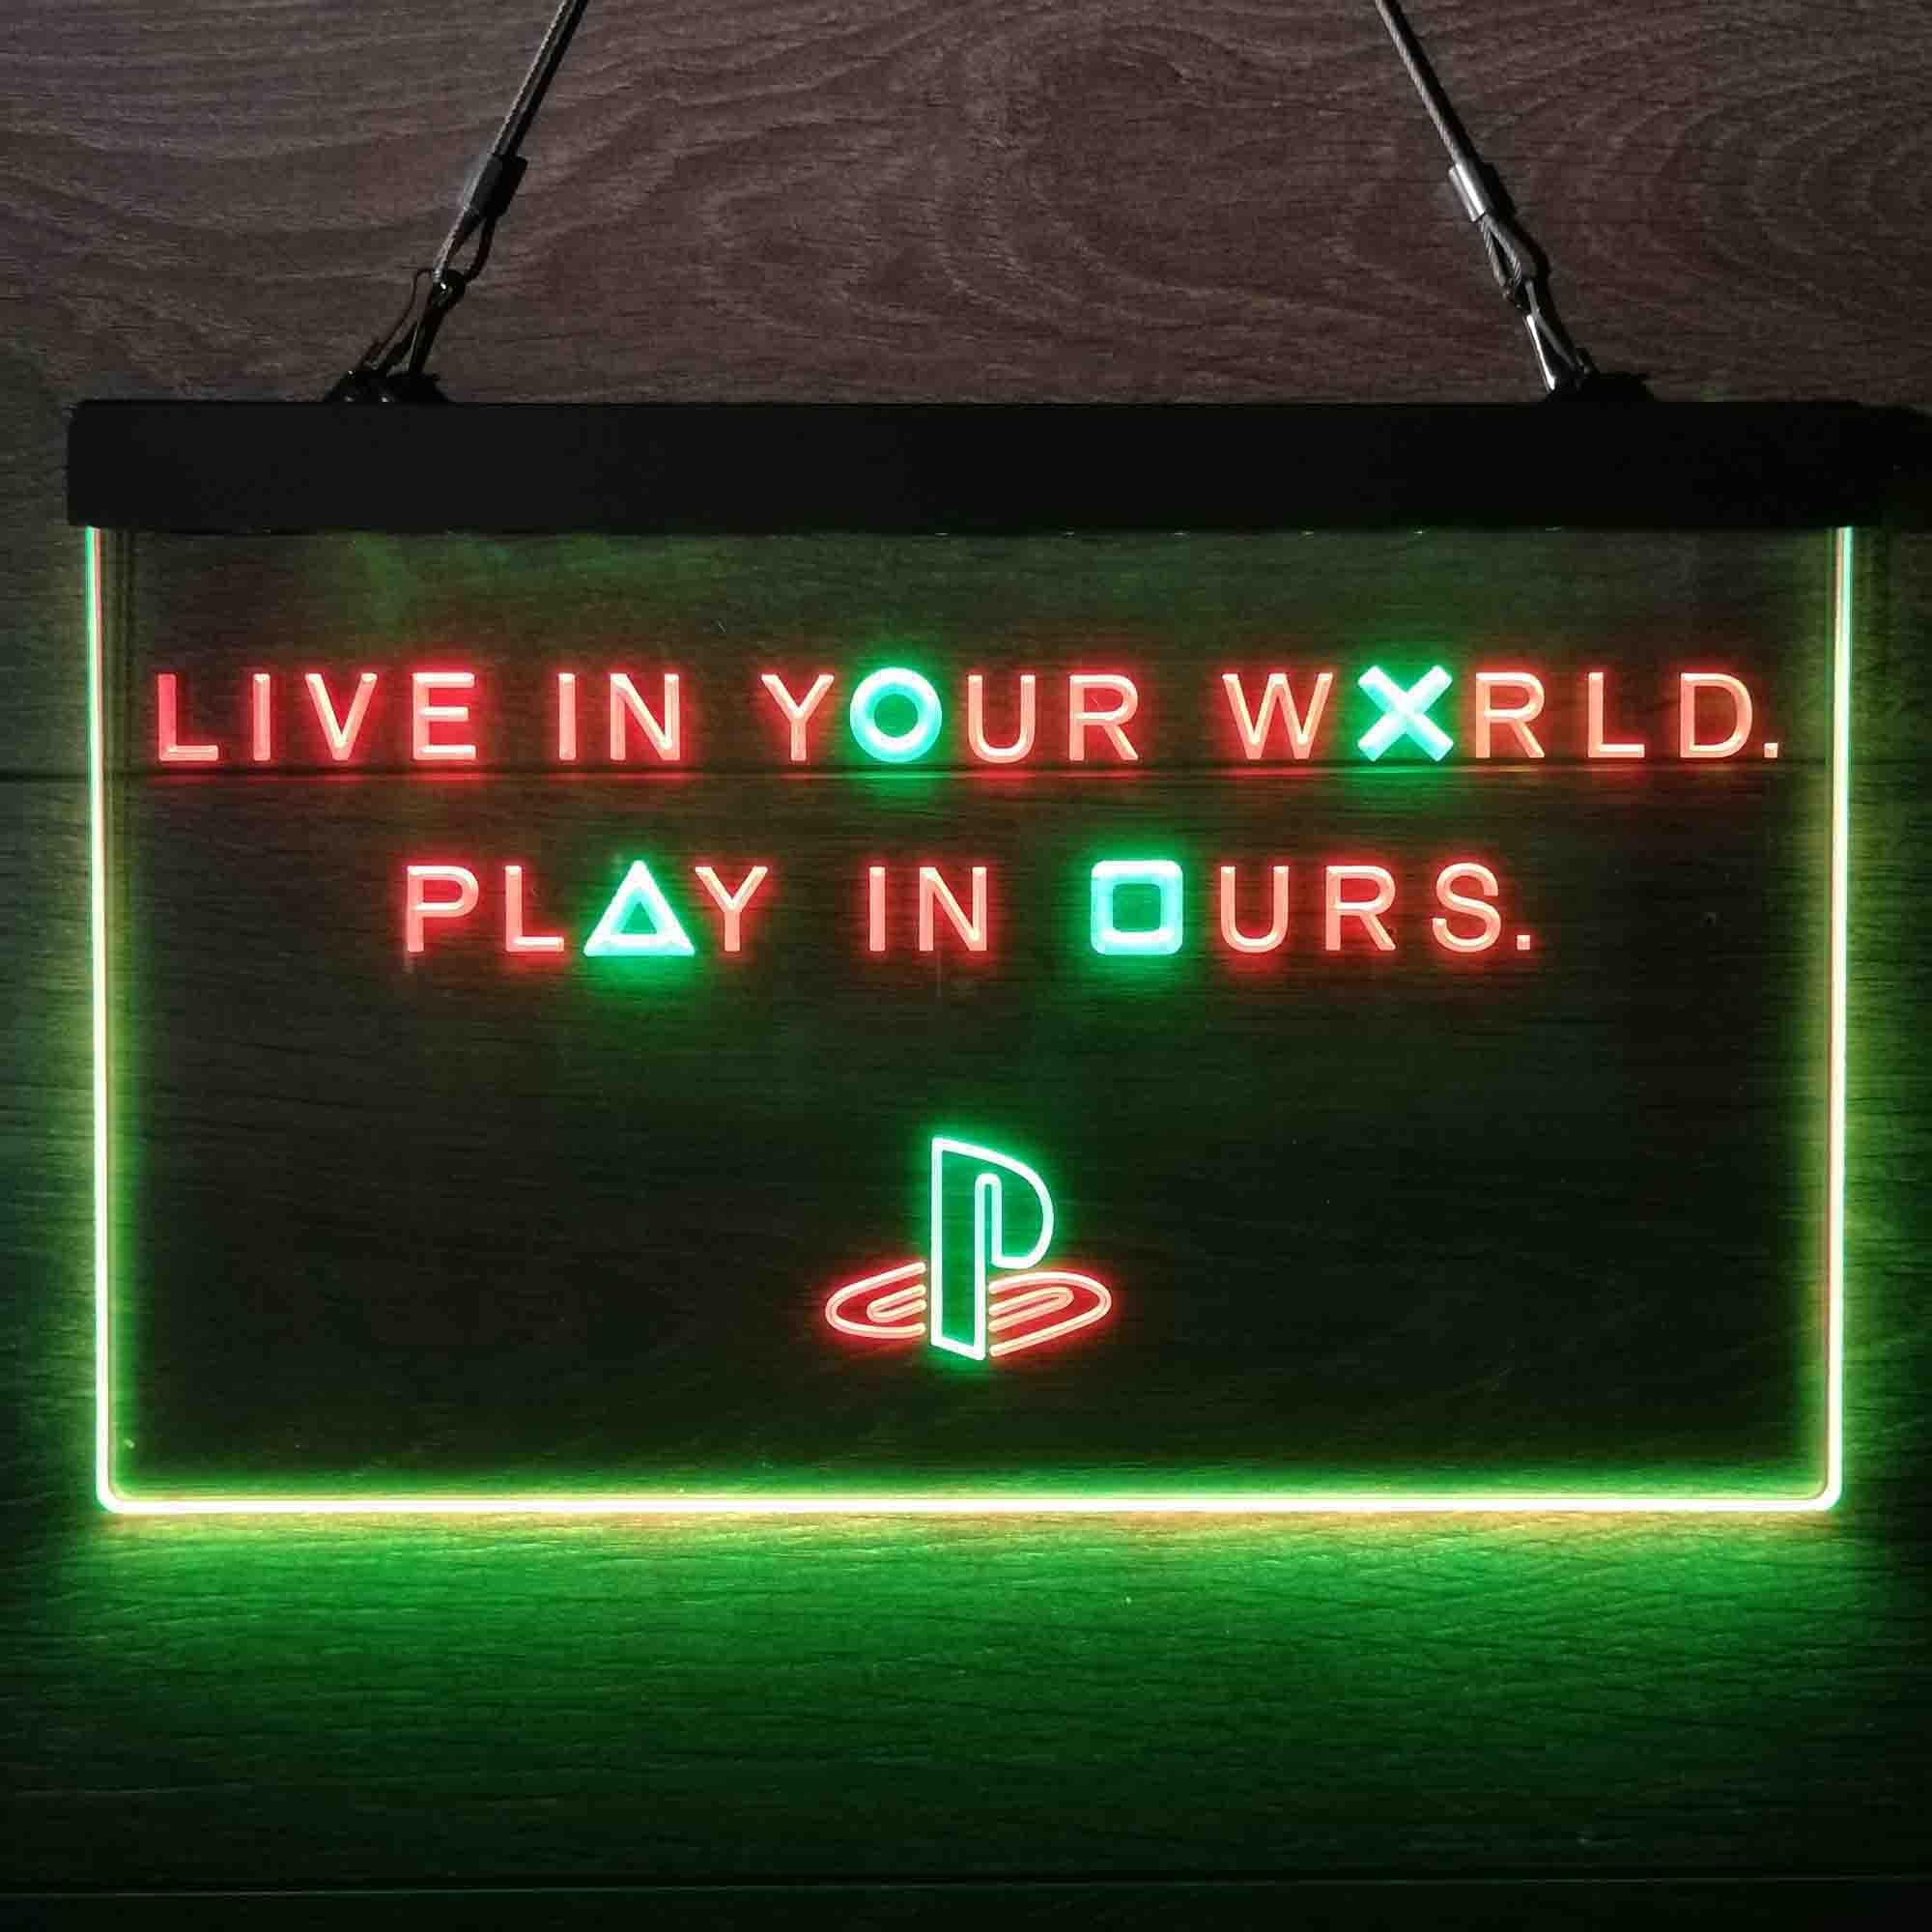 Playstation Play In Ours Game Room Neon-Like LED Sign